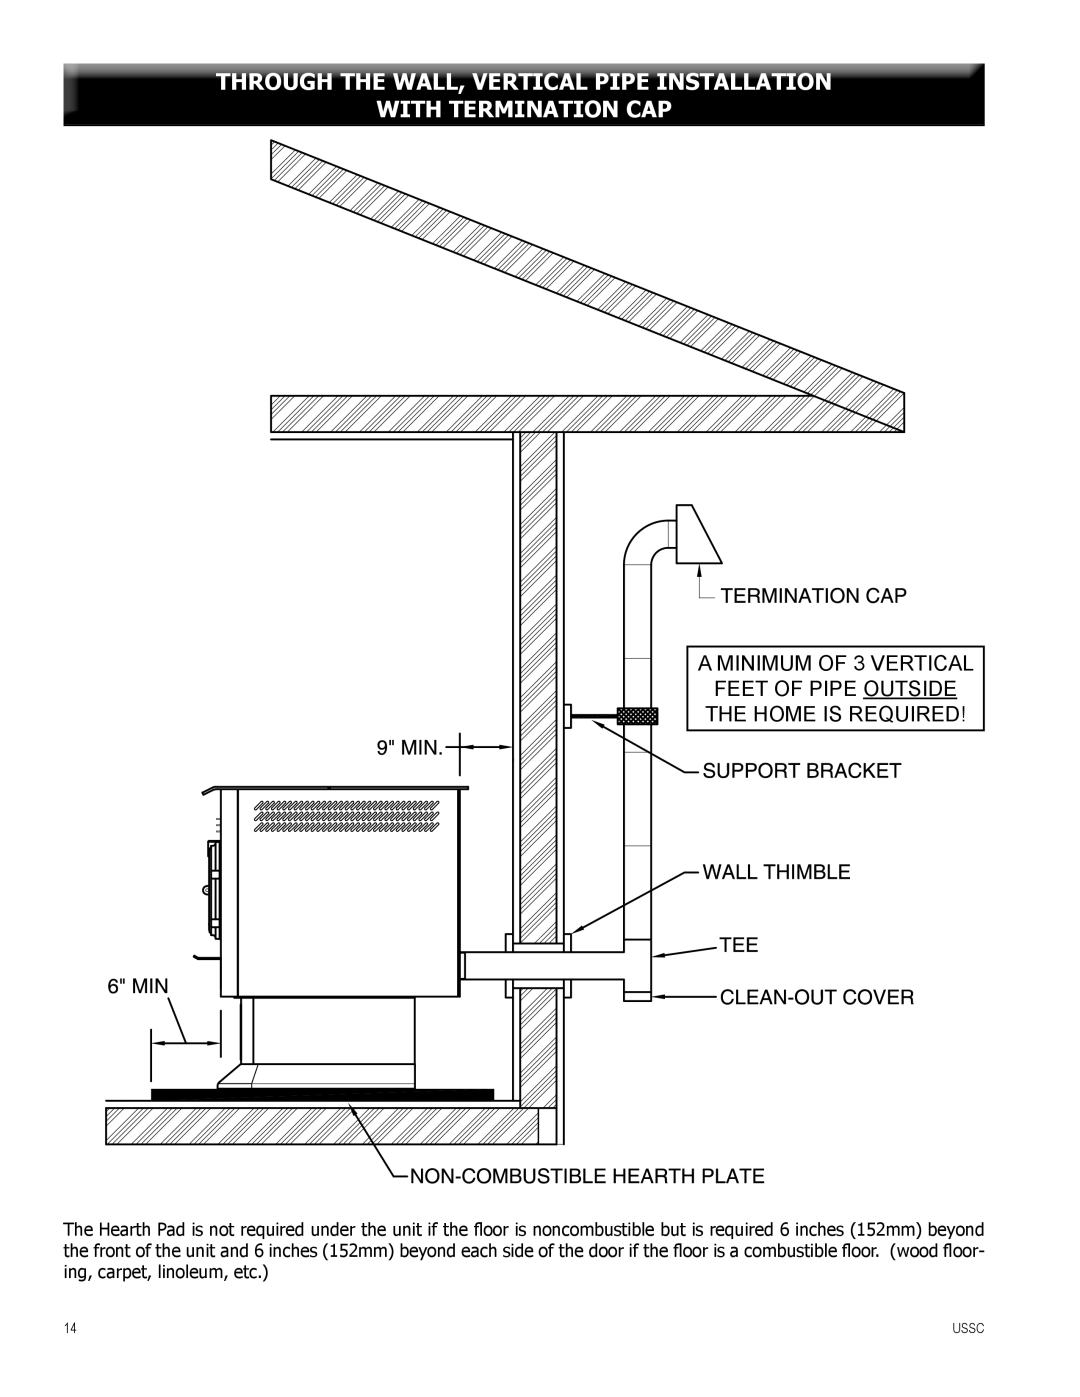 United States Stove 6041 Through The Wall, Vertical Pipe Installation, With Termination Cap, The Home Is Required, Ussc 